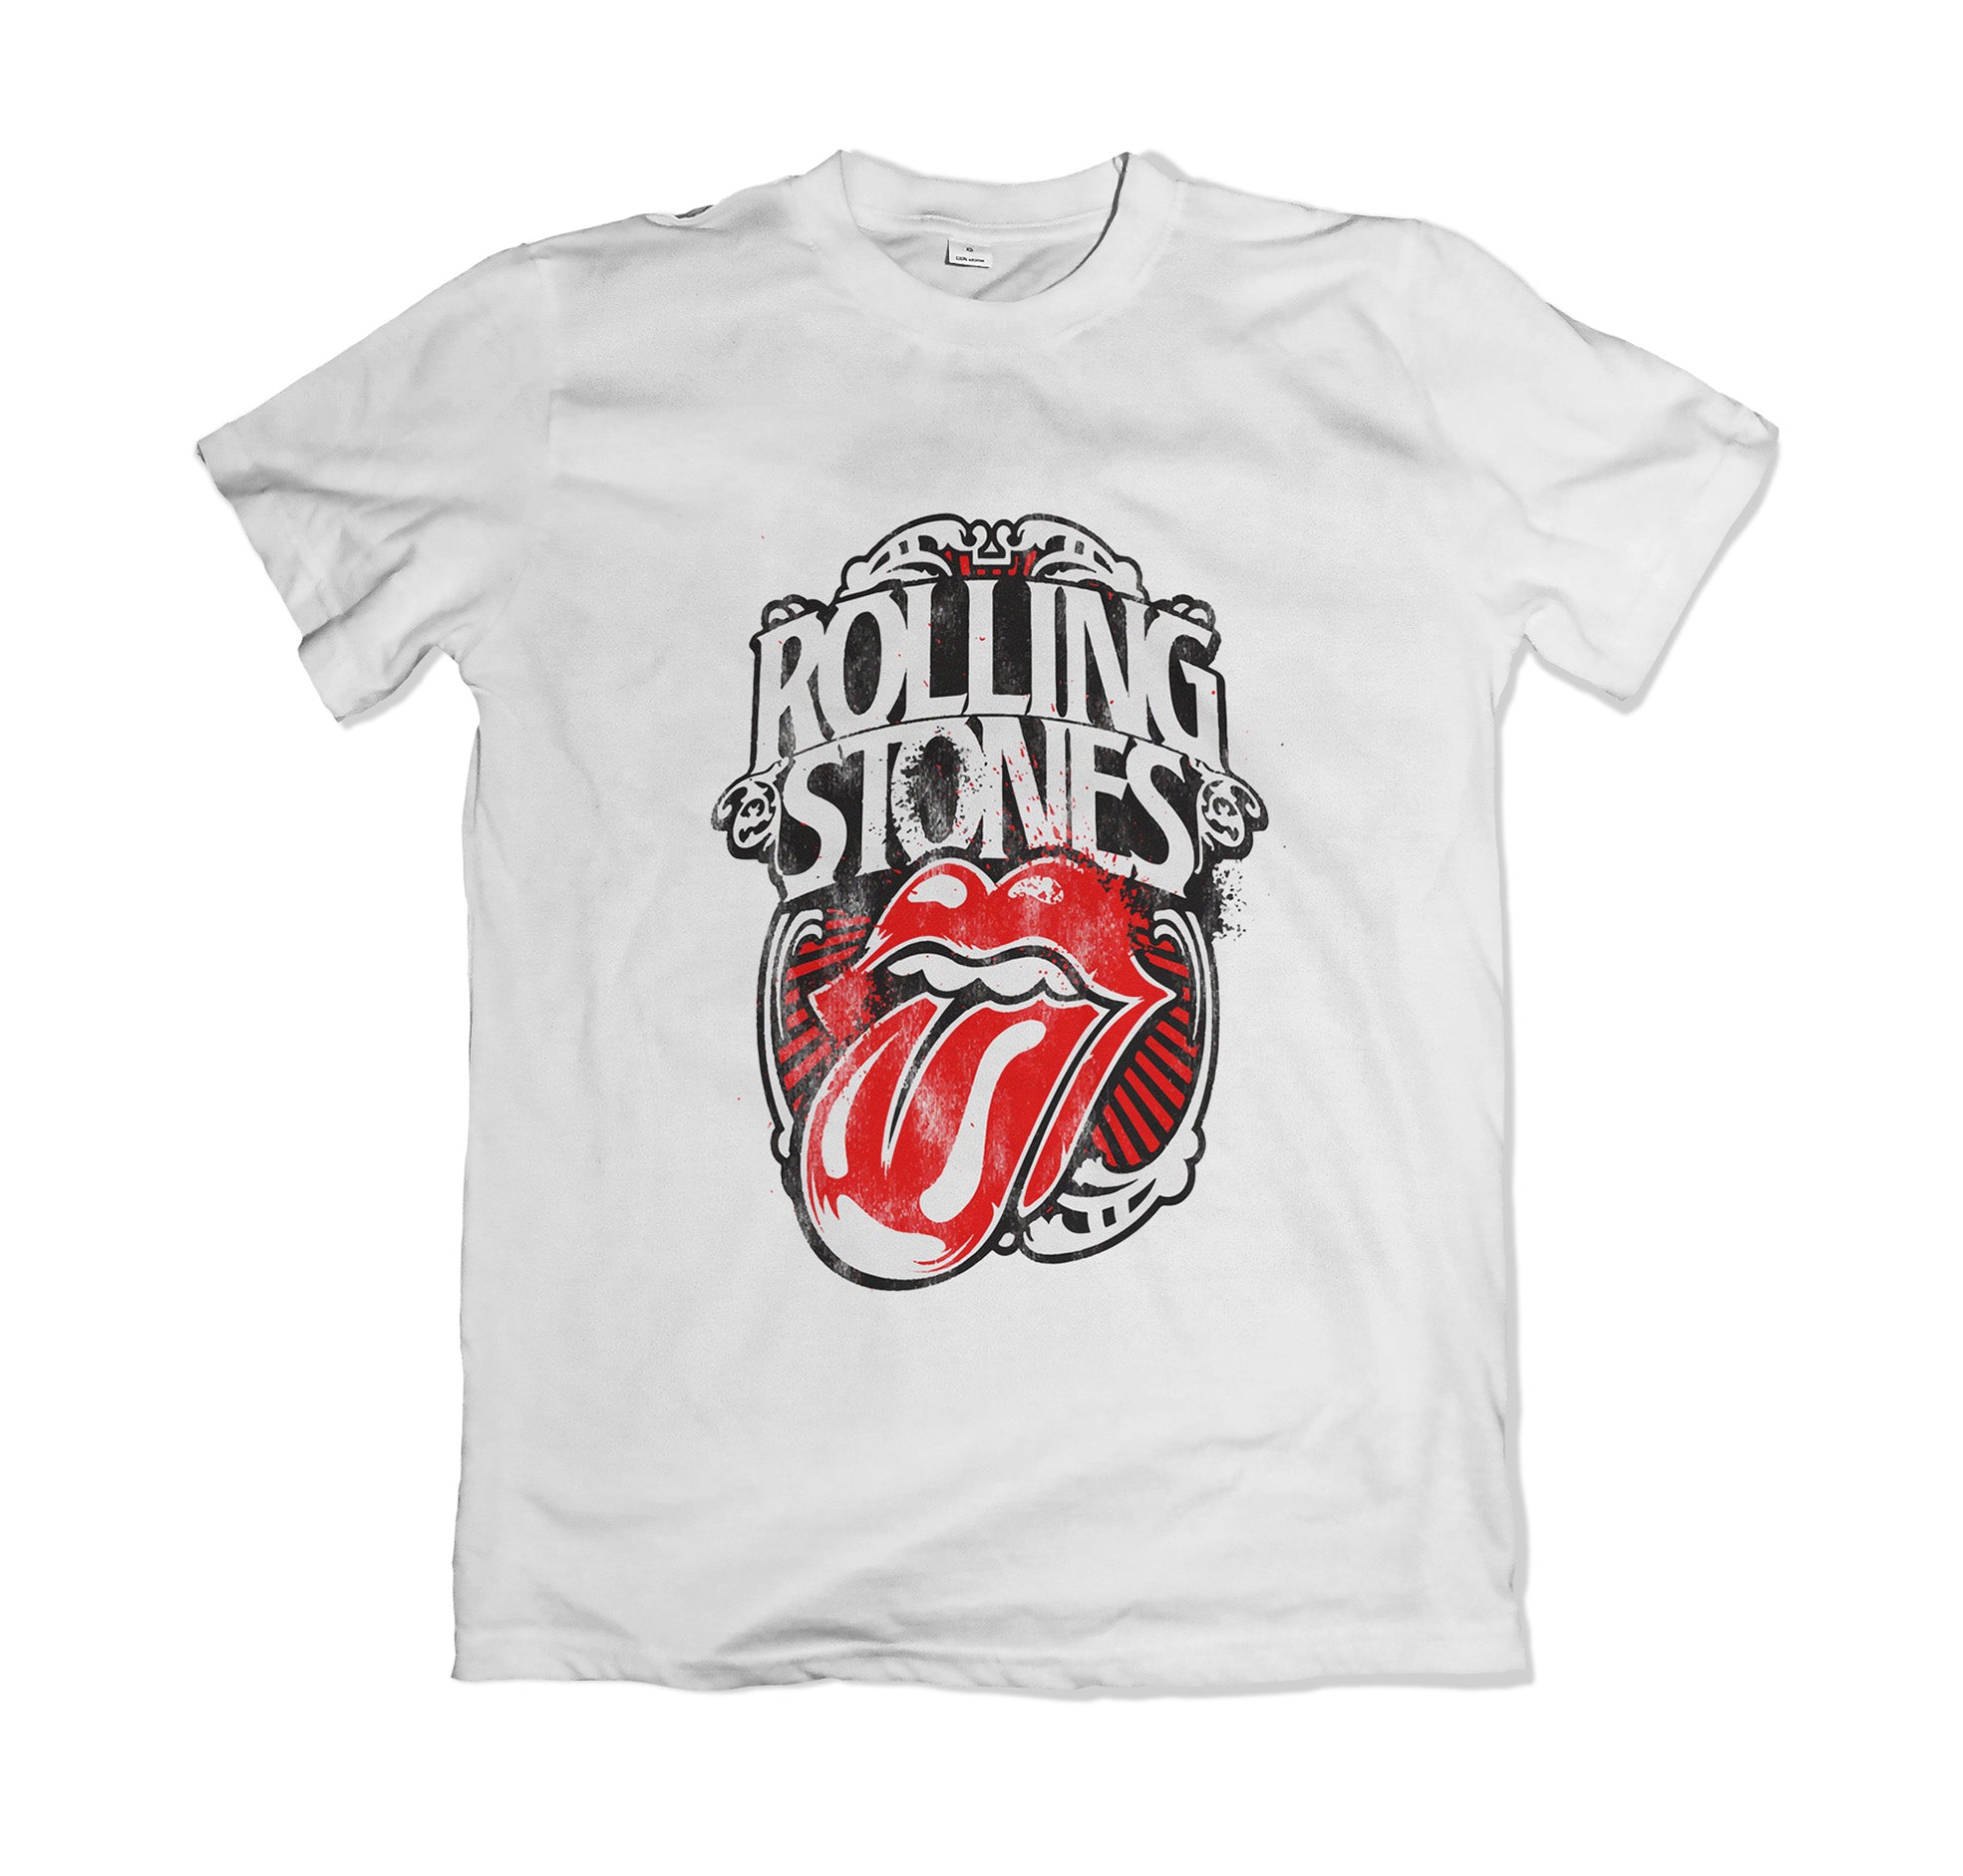 T-shirt "The Rolling Stones"